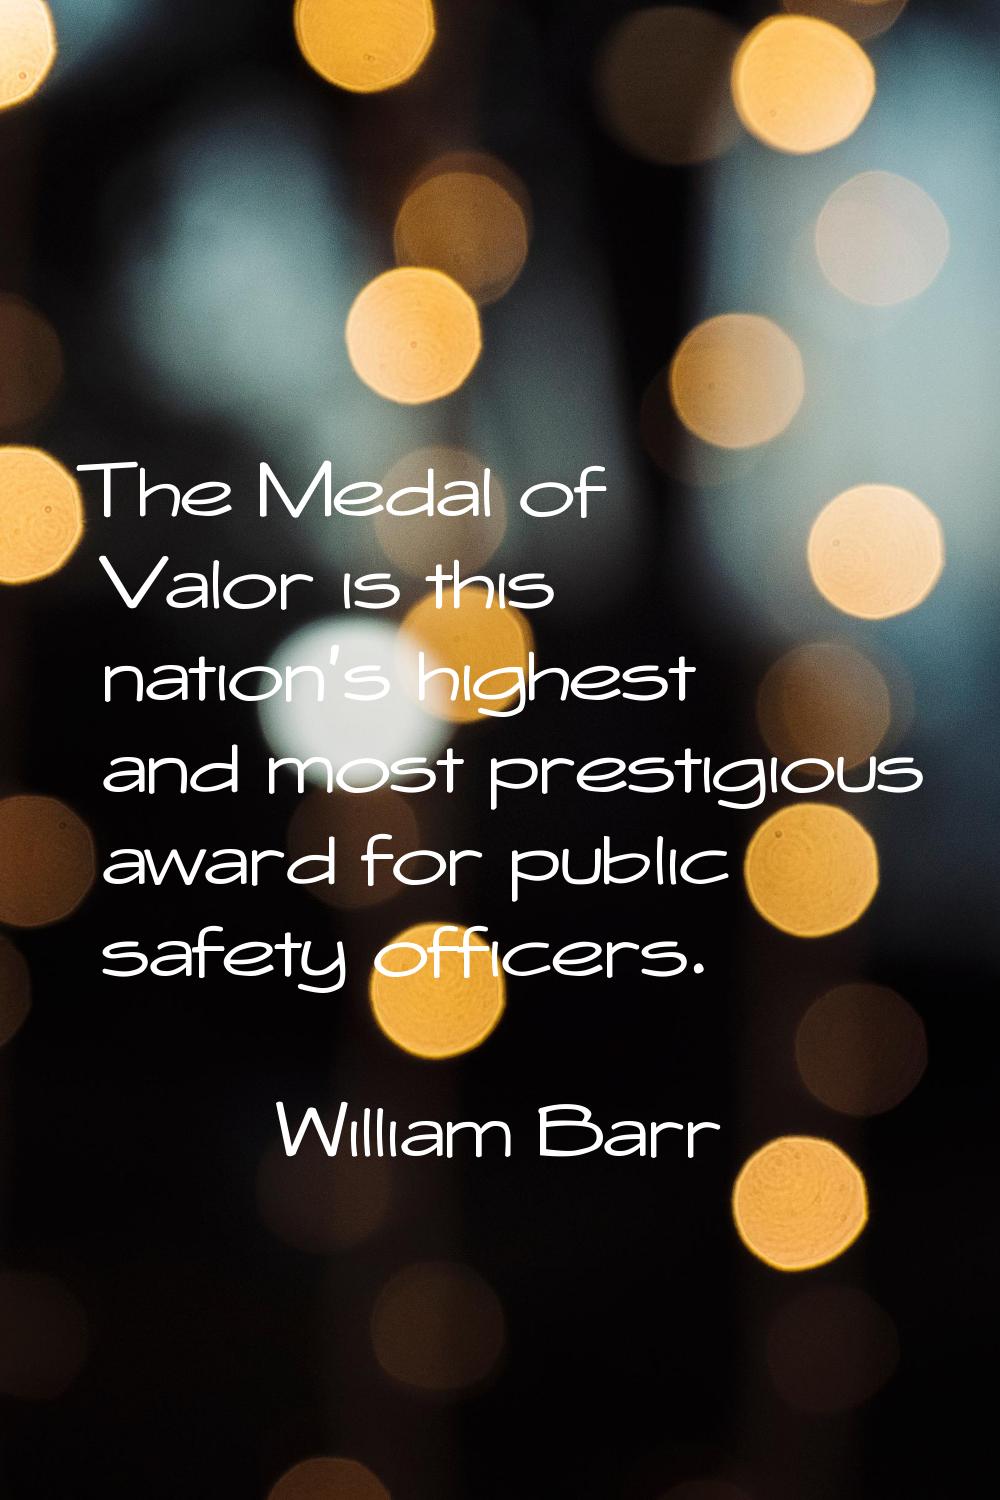 The Medal of Valor is this nation's highest and most prestigious award for public safety officers.